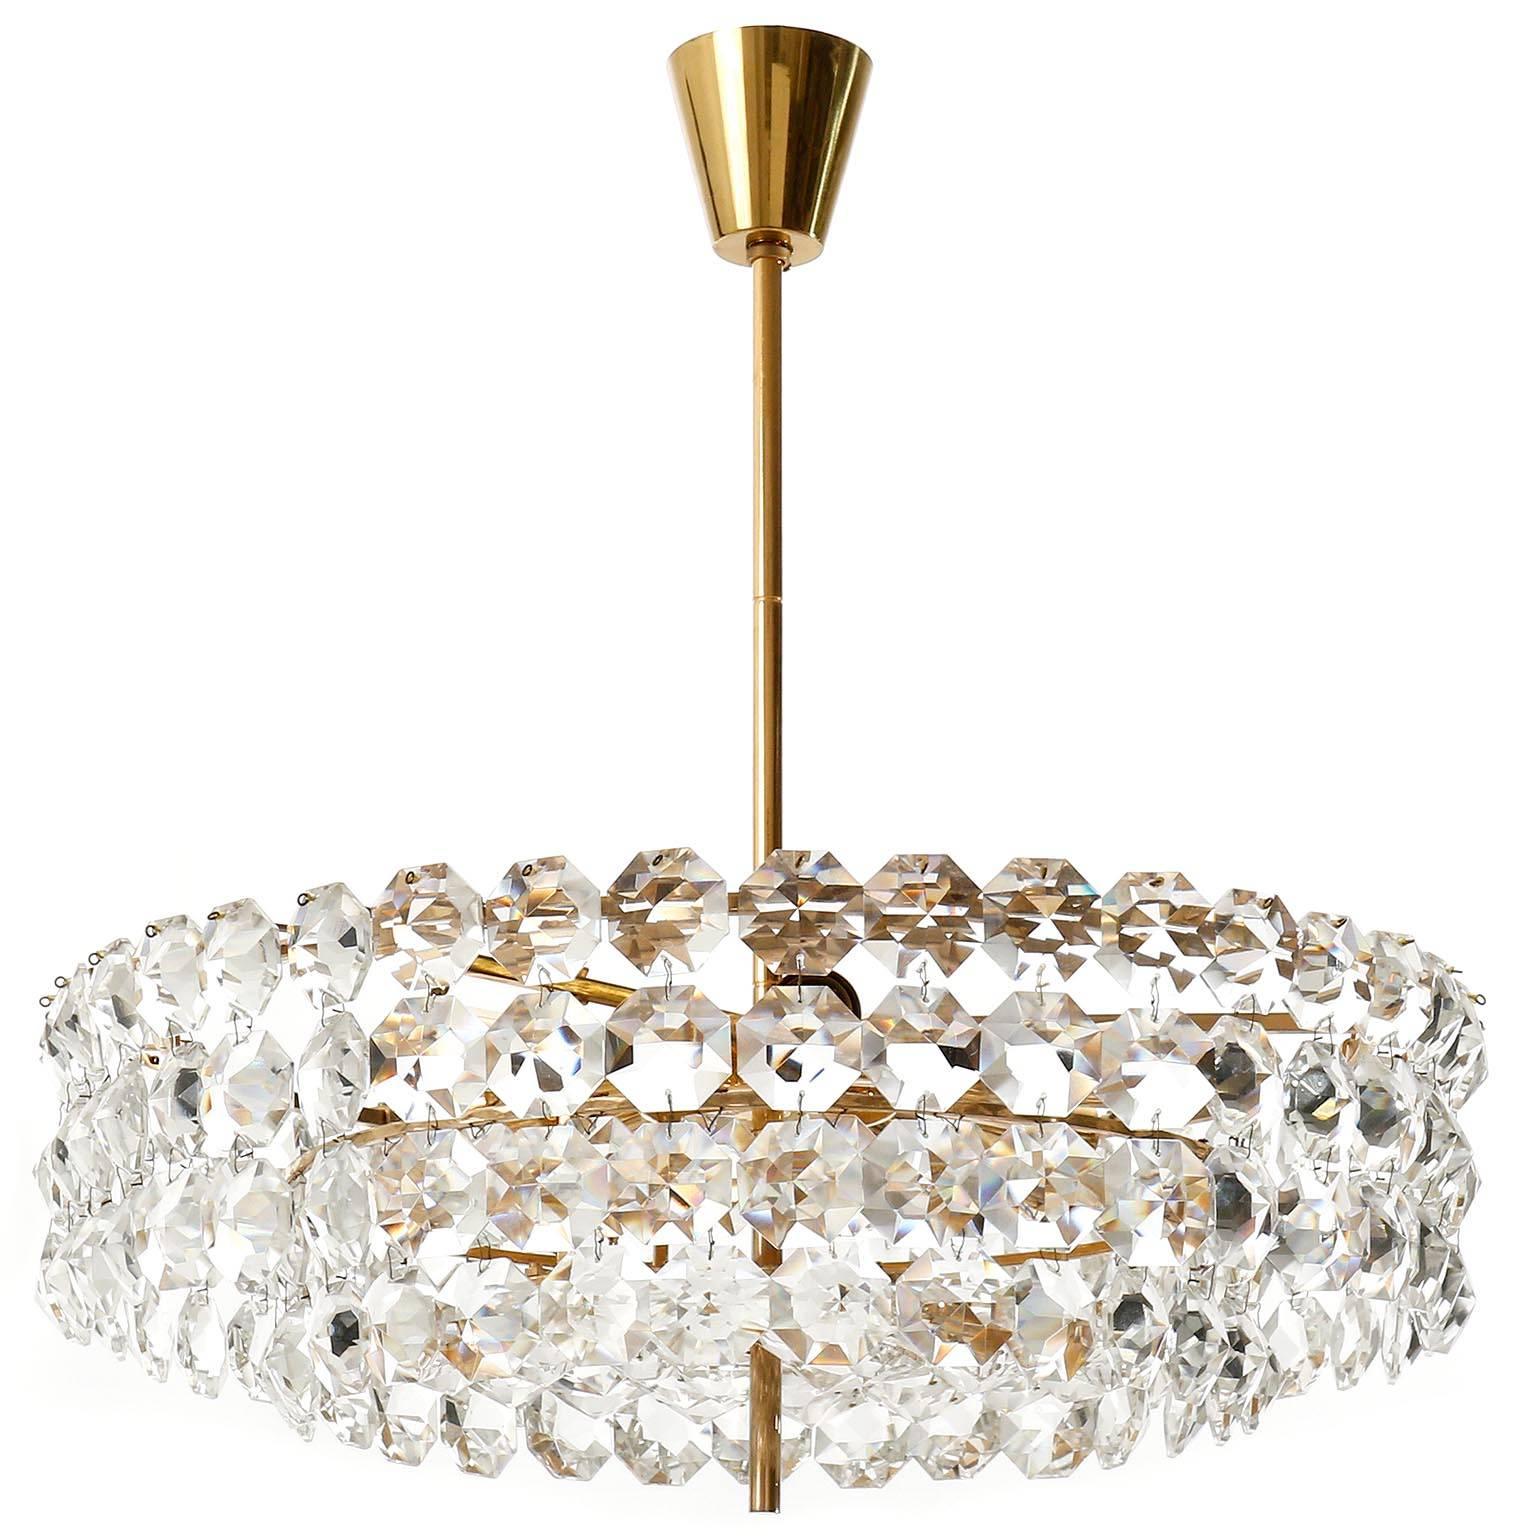 A very exclusive and high quality gold plated chandelier by Bakalowits & Soehne, Austria, manufactured in Mid-Century, circa 1960.
The light fixutre is made of a gilded brass frame and hand cut diamond shaped crystal glasses. There are twelve